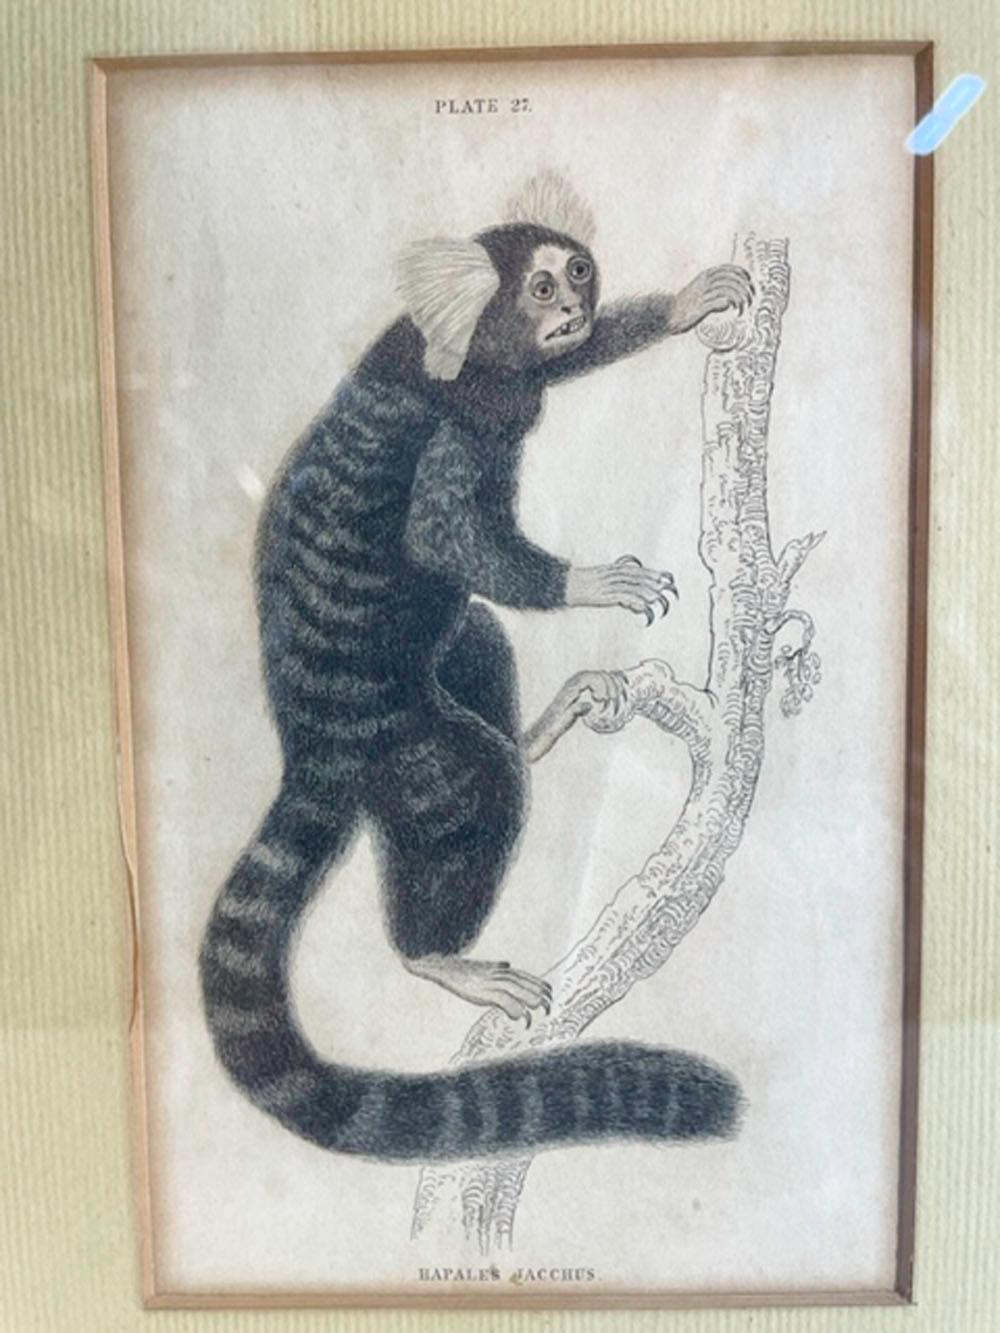 Three 18th / 19th century hand-colored engravings of monkeys matted and framed in a single frame.
Sight size 6